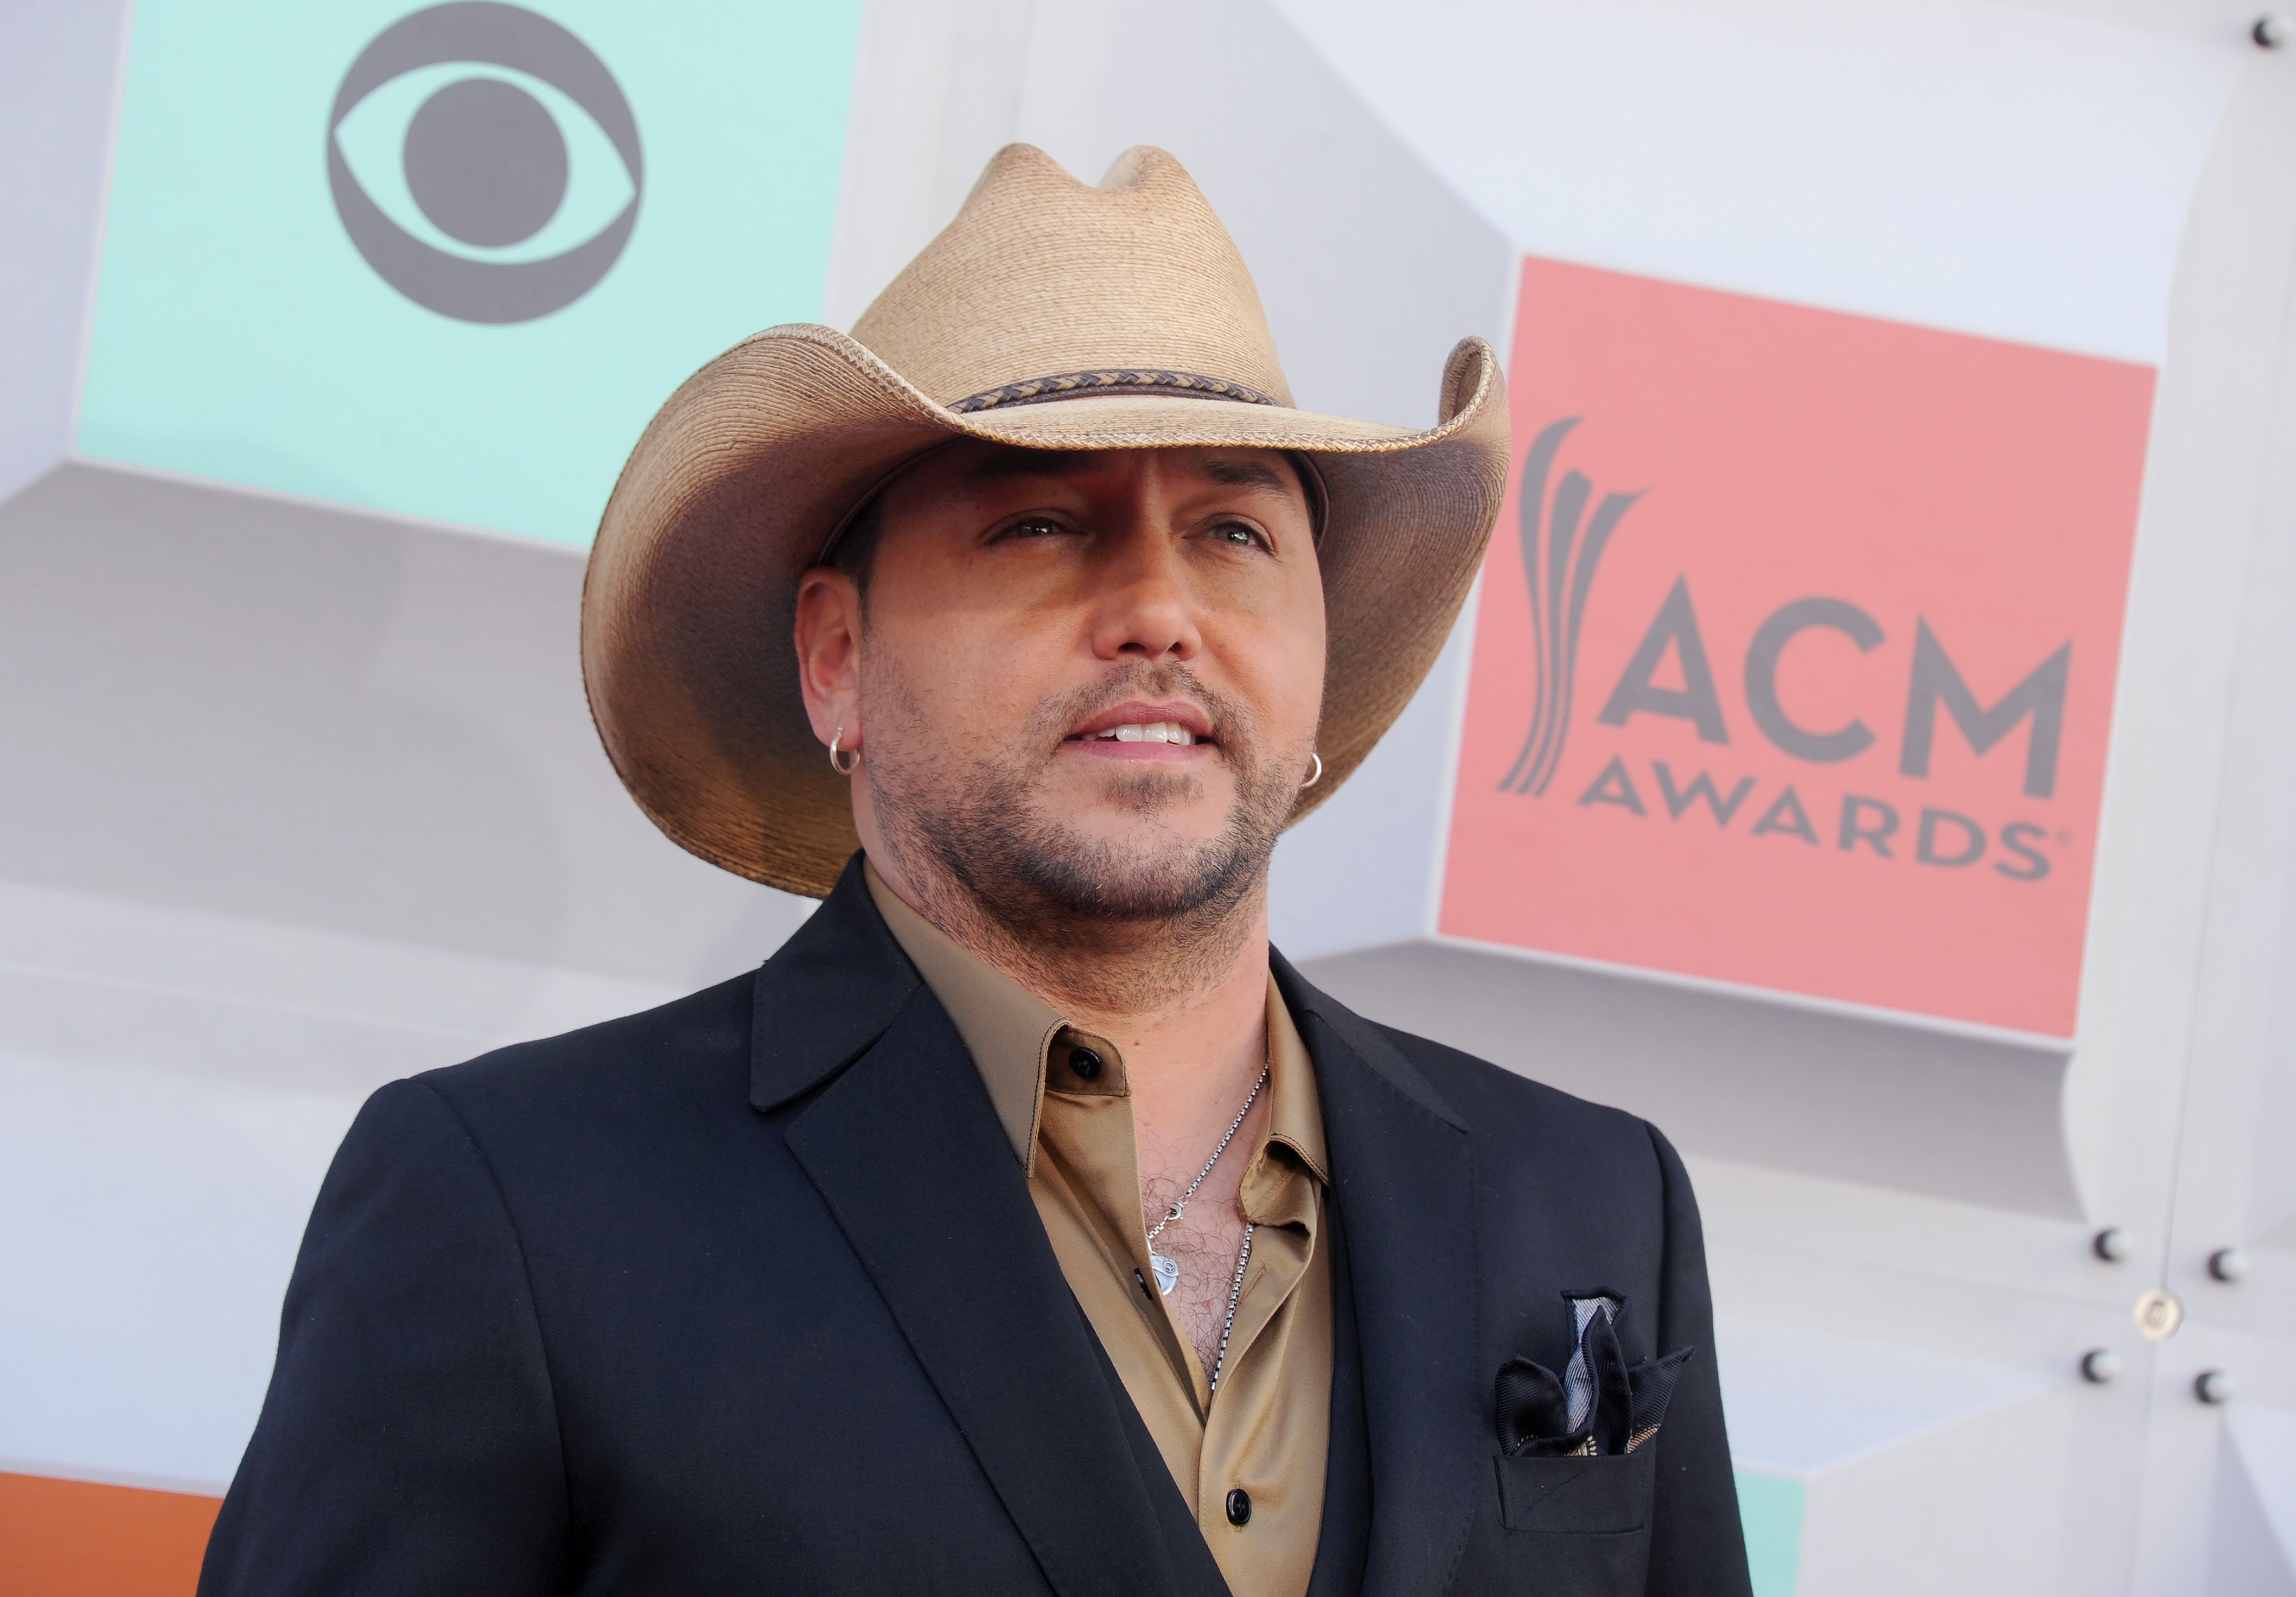 Jason Aldean at the 51st Academy Of Country Music Awards at MGM Grand Garden Arena on April 3, 2016 | Photo: Getty Images